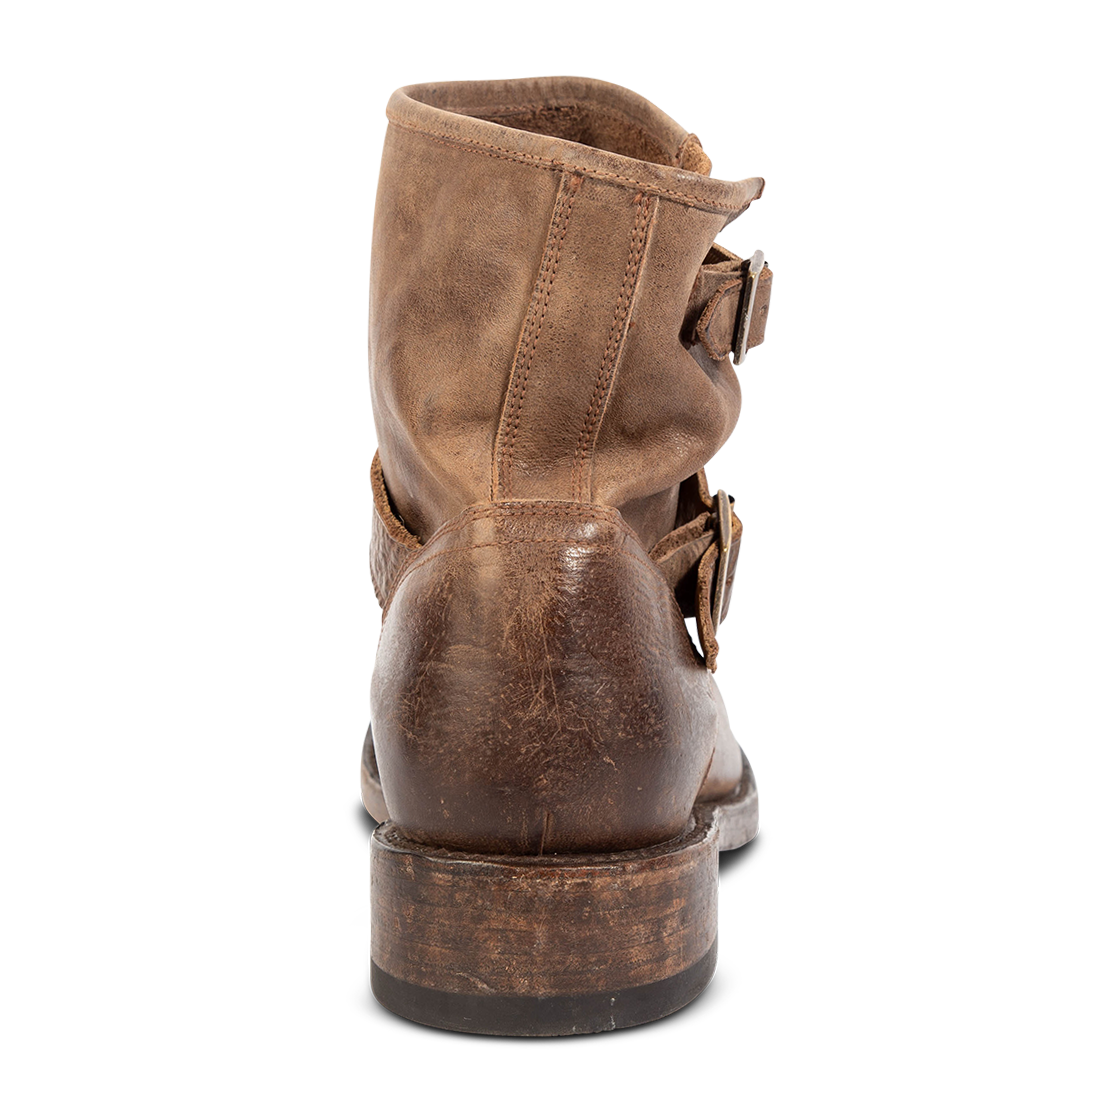 Back view showing stacked leather heel on FREEBIRD men's Charles brown leather boot